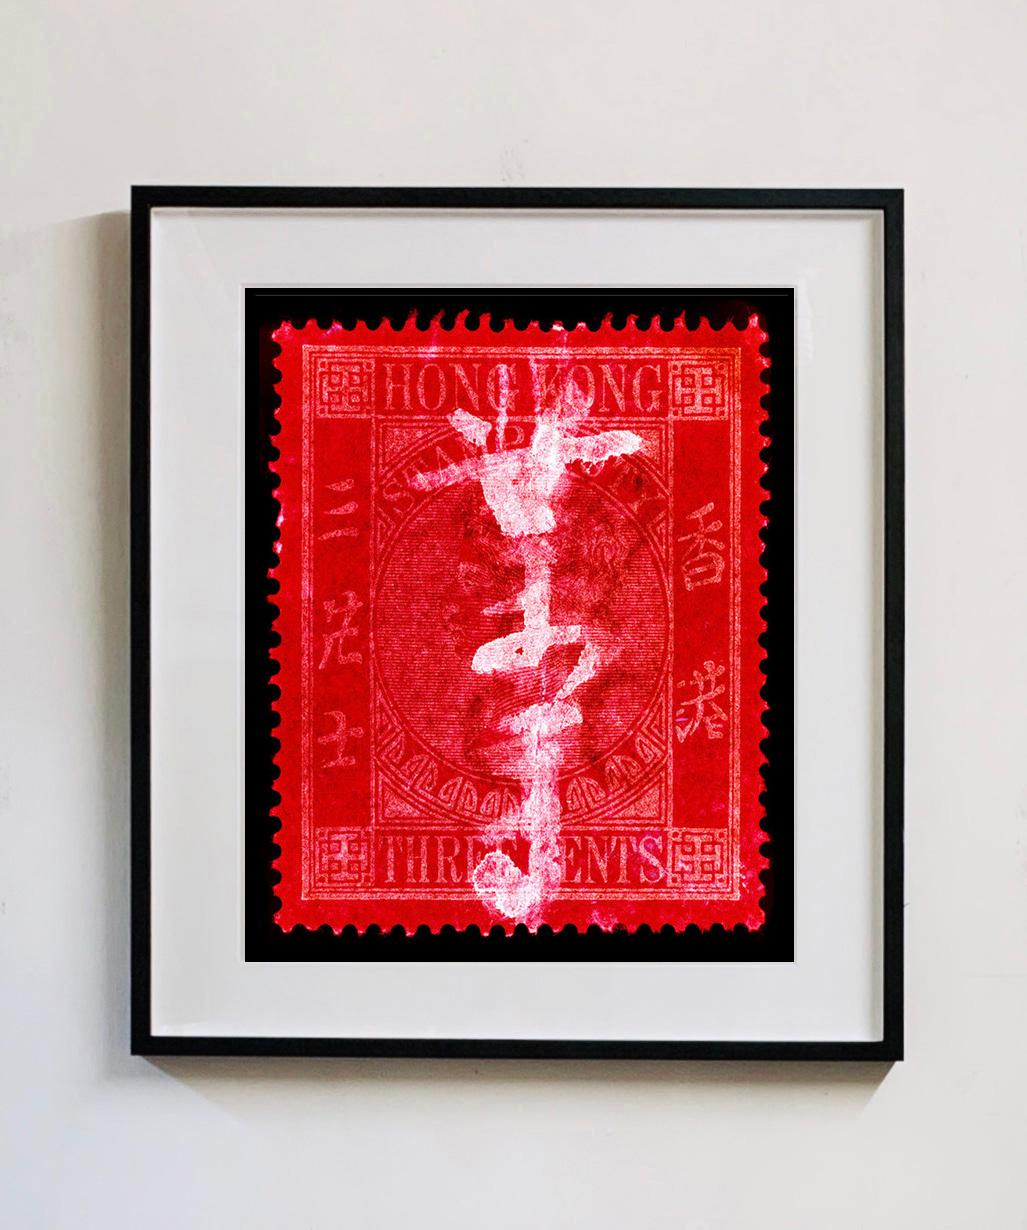 QV 3 Cents, from the Heidler & Heeps Stamp Collection, Hong Kong Series. The fine detailed tapestry of the original Hong Kong small postage stamp has been brought to life and made unique by the franking mark and Heidler & Heeps specialist darkroom